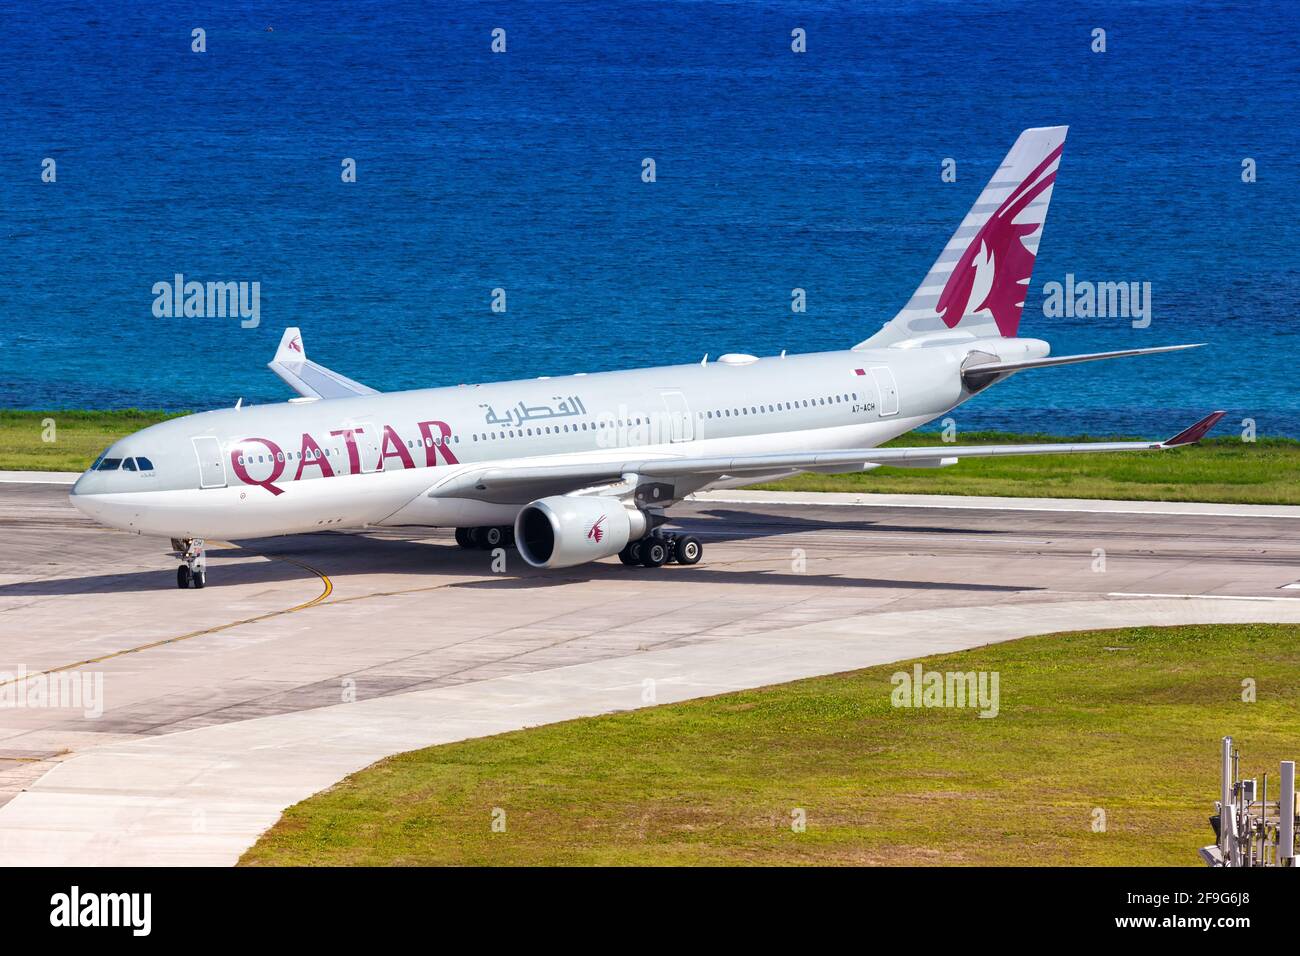 Mahe, Seychelles - November 24, 2017: Qatar Airways Airbus A330 airplane at Seychelles International Airport (SEZ) in the Seychelles. Airbus is a Euro Stock Photo